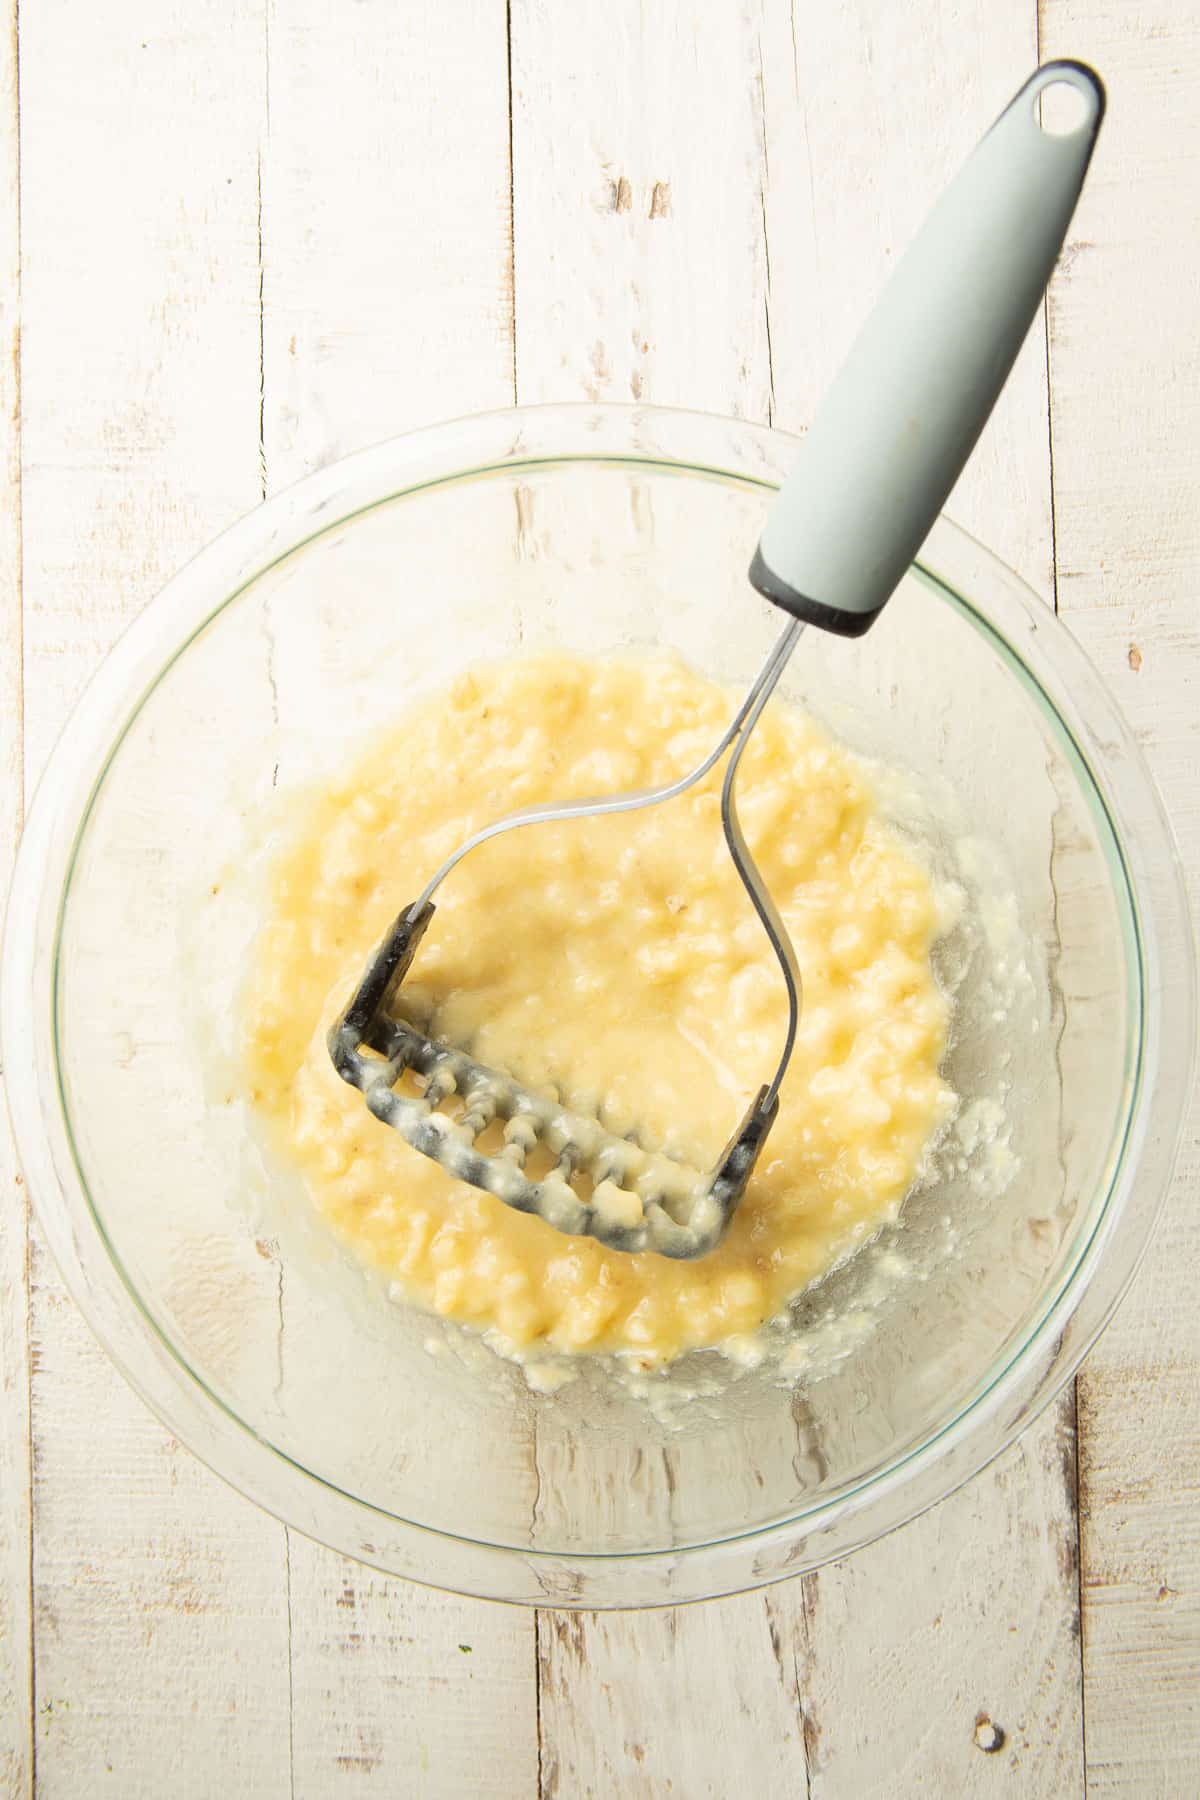 Mashed banana in a mixing bowl with a potato masher.